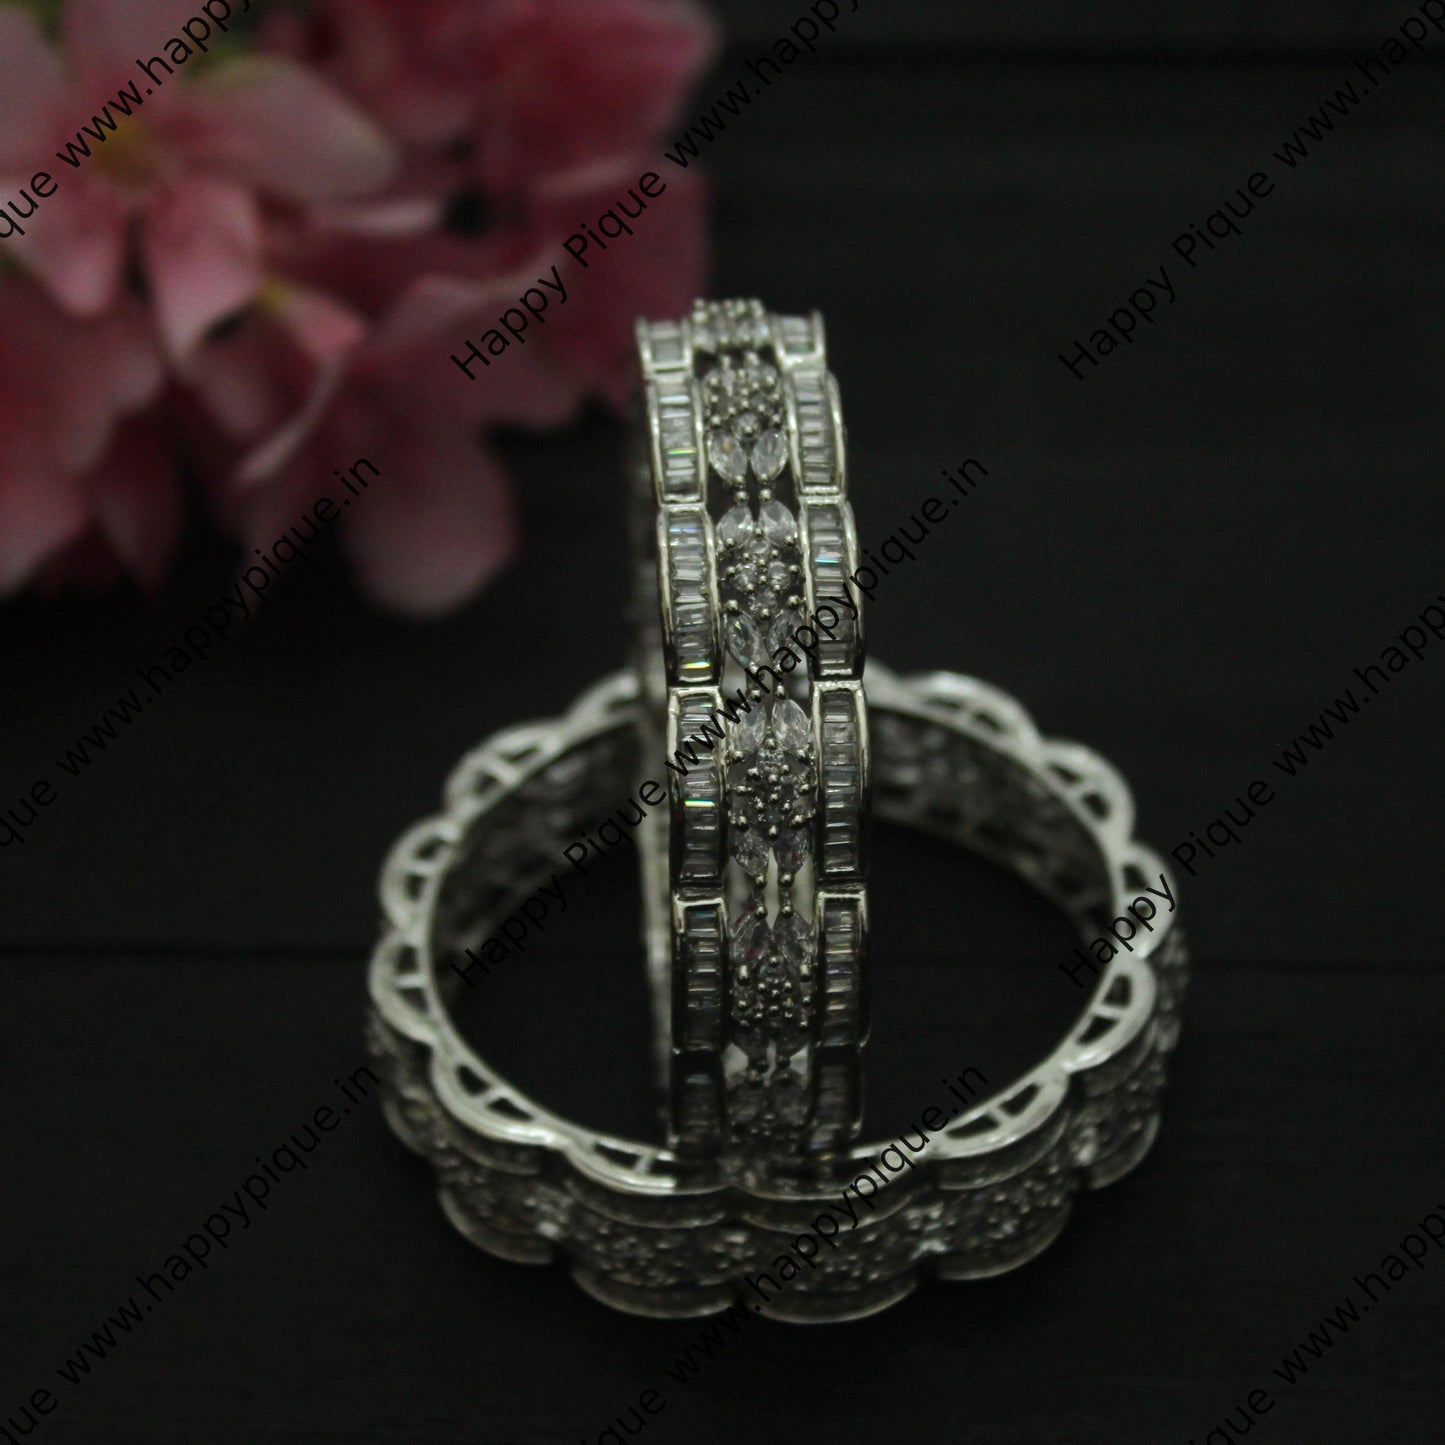 Thick CZ & AD Stones Studded Silver Plated Statement Bangles